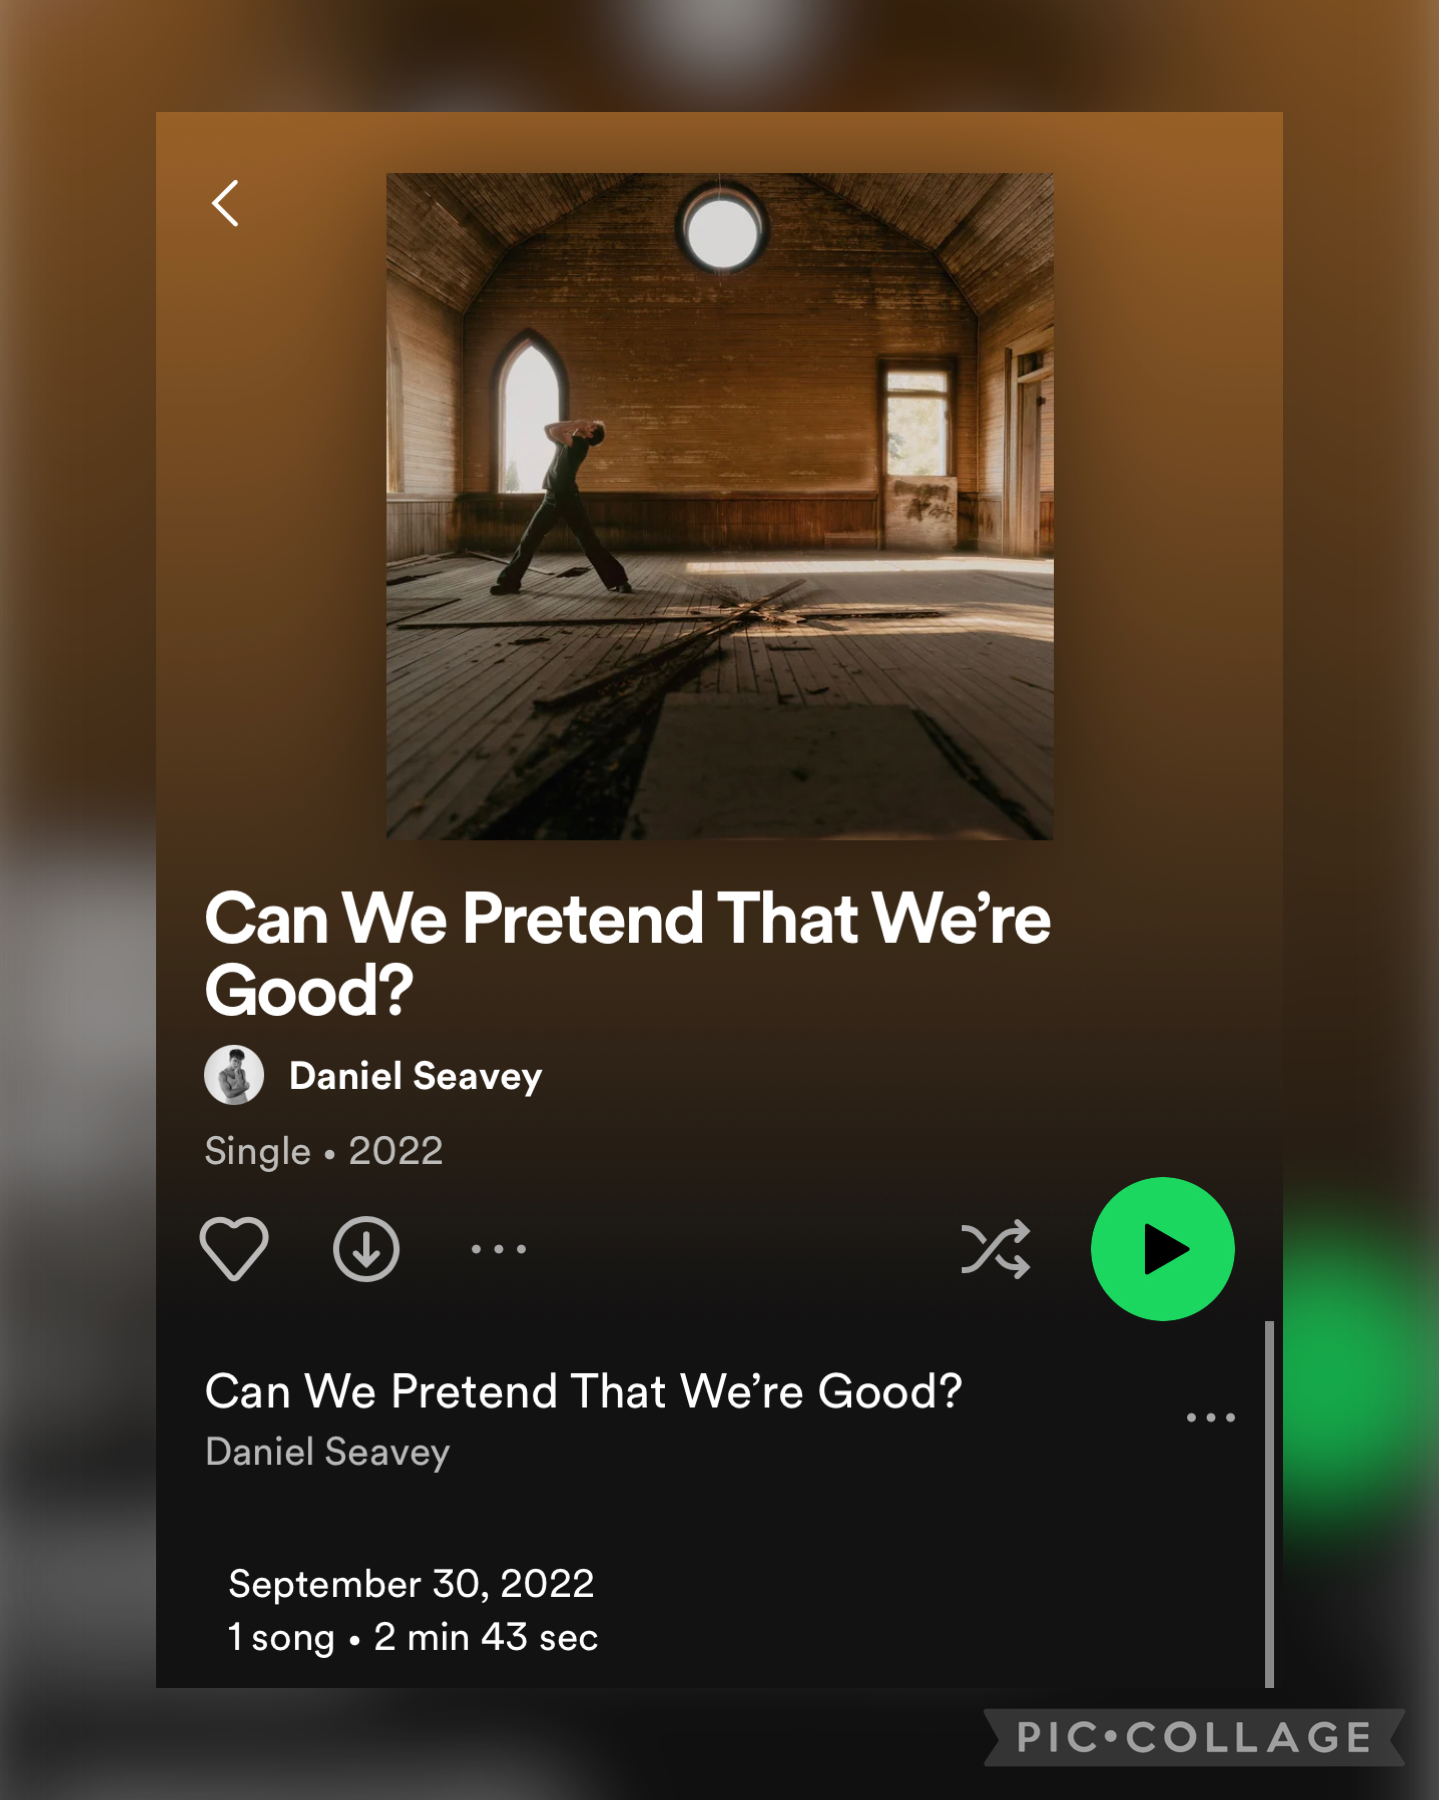 Daniel dropped a song yesterday!! Bitter sweet moment without the boys😪 what’re your thoughts??